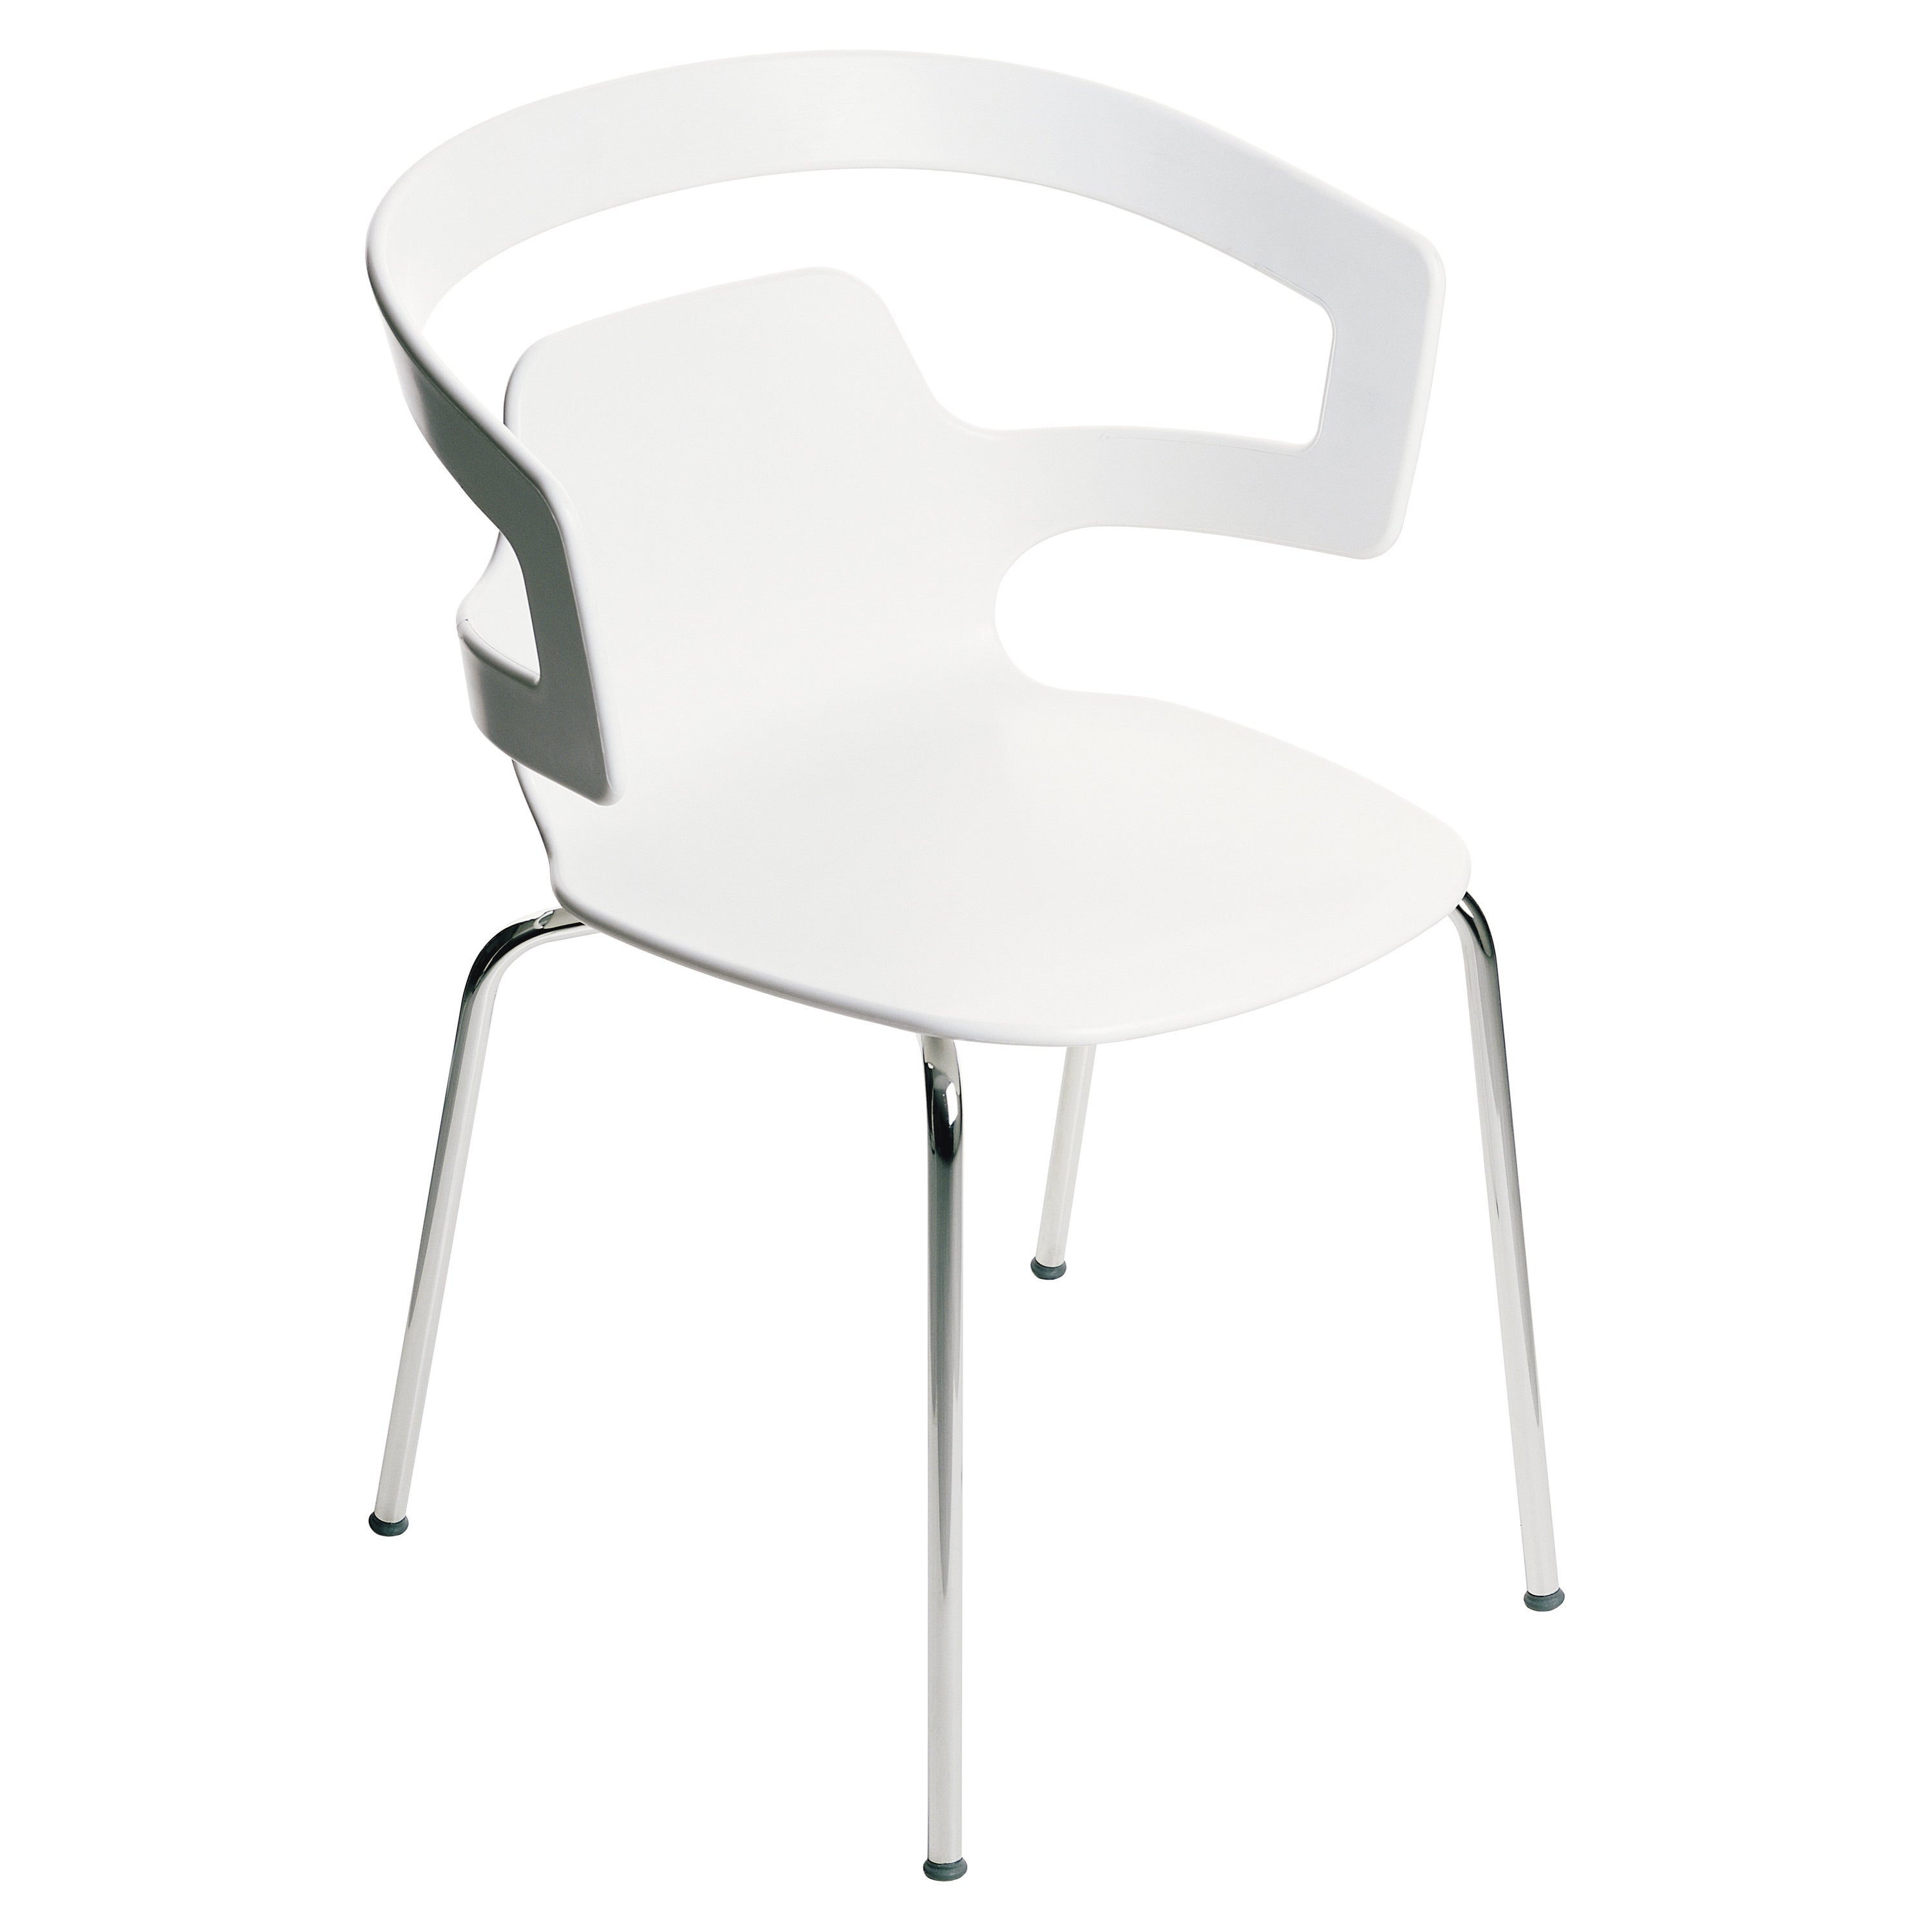 Alias 500 Segesta Chair in White Seat and Chromed Steel Frame by Alfredo Häberli